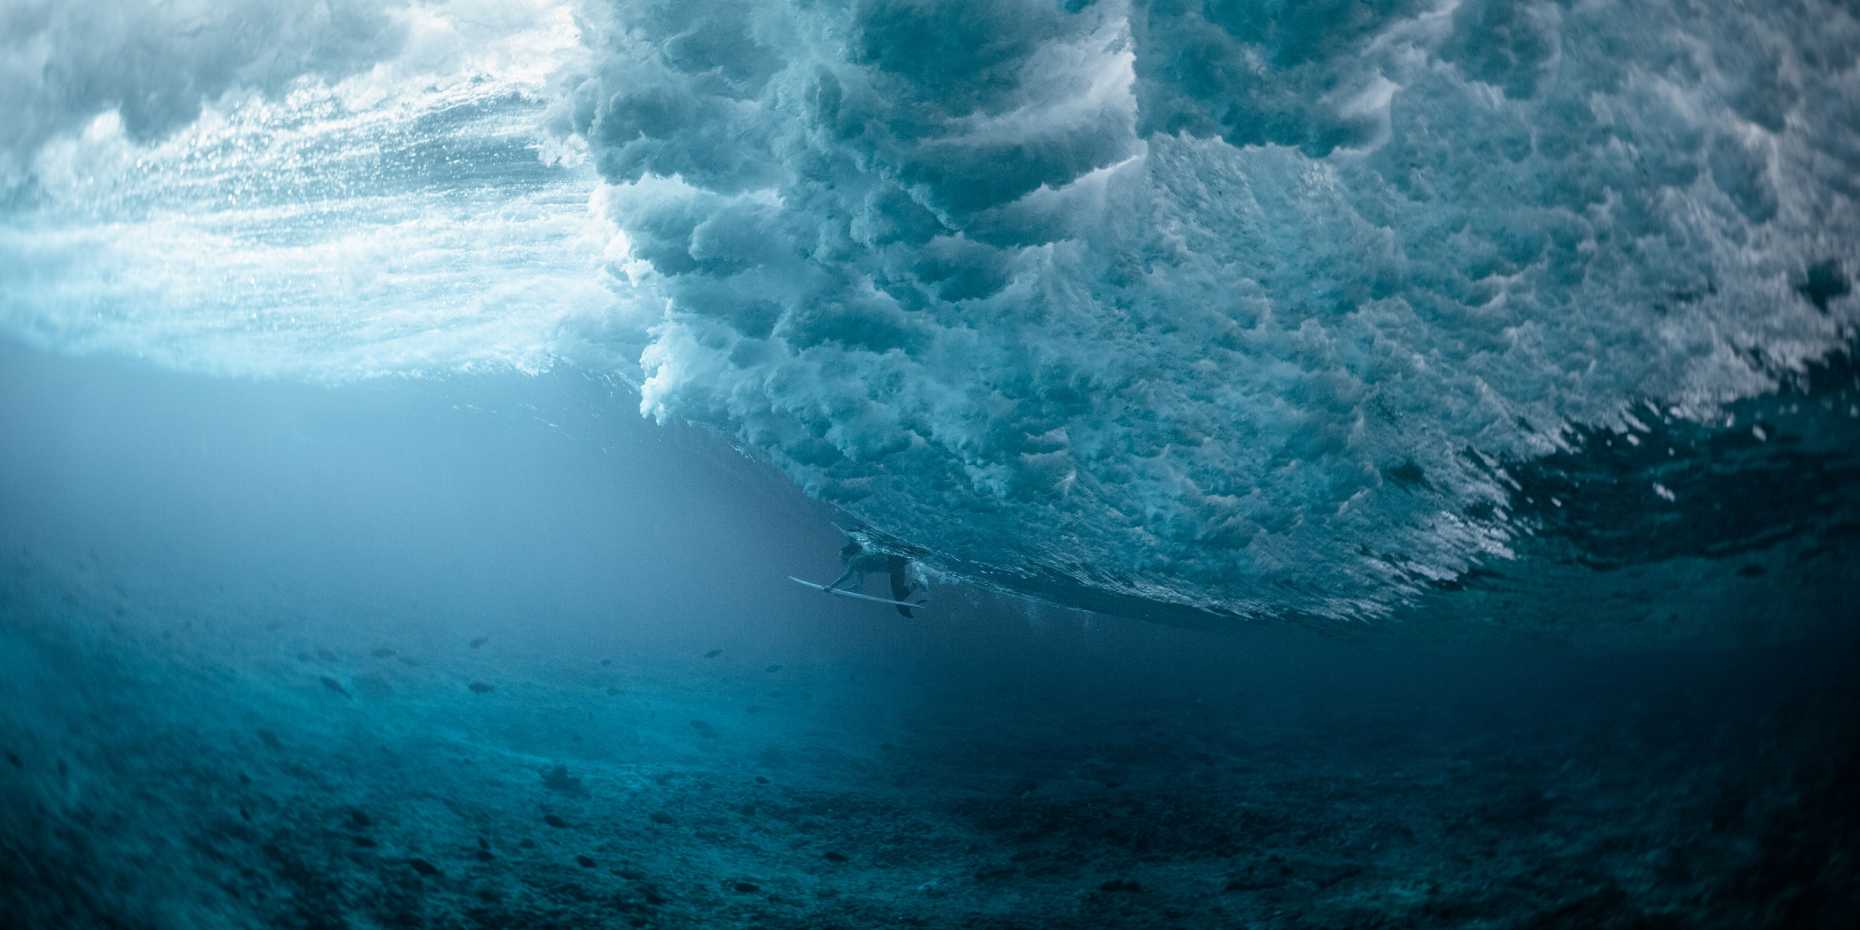 Underwater image of wave with seabed